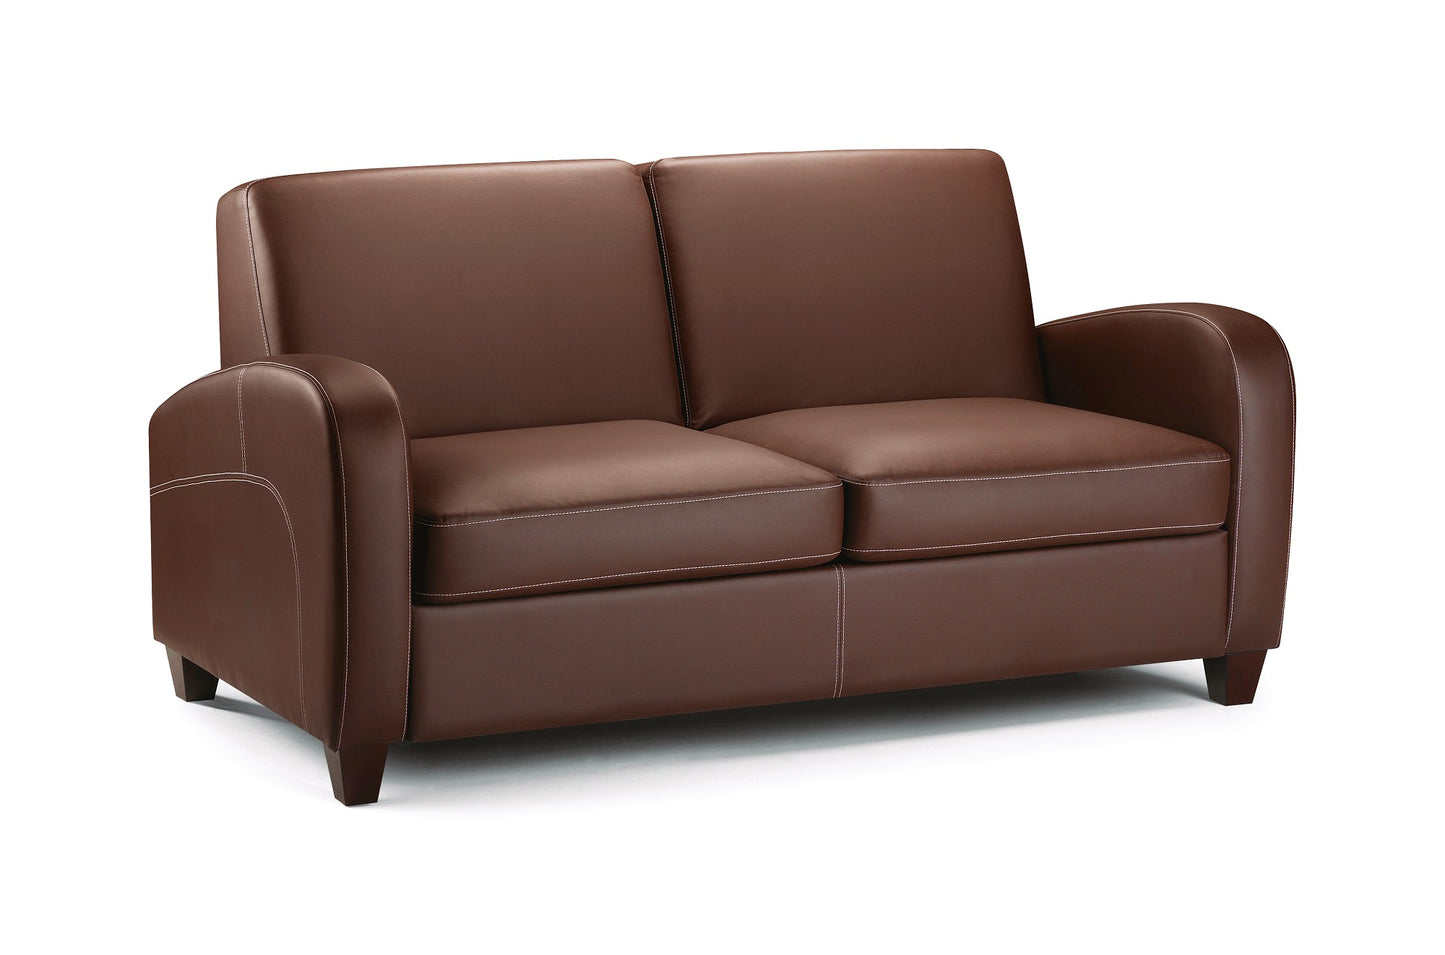 Chestnut Faux Leather Sofabed